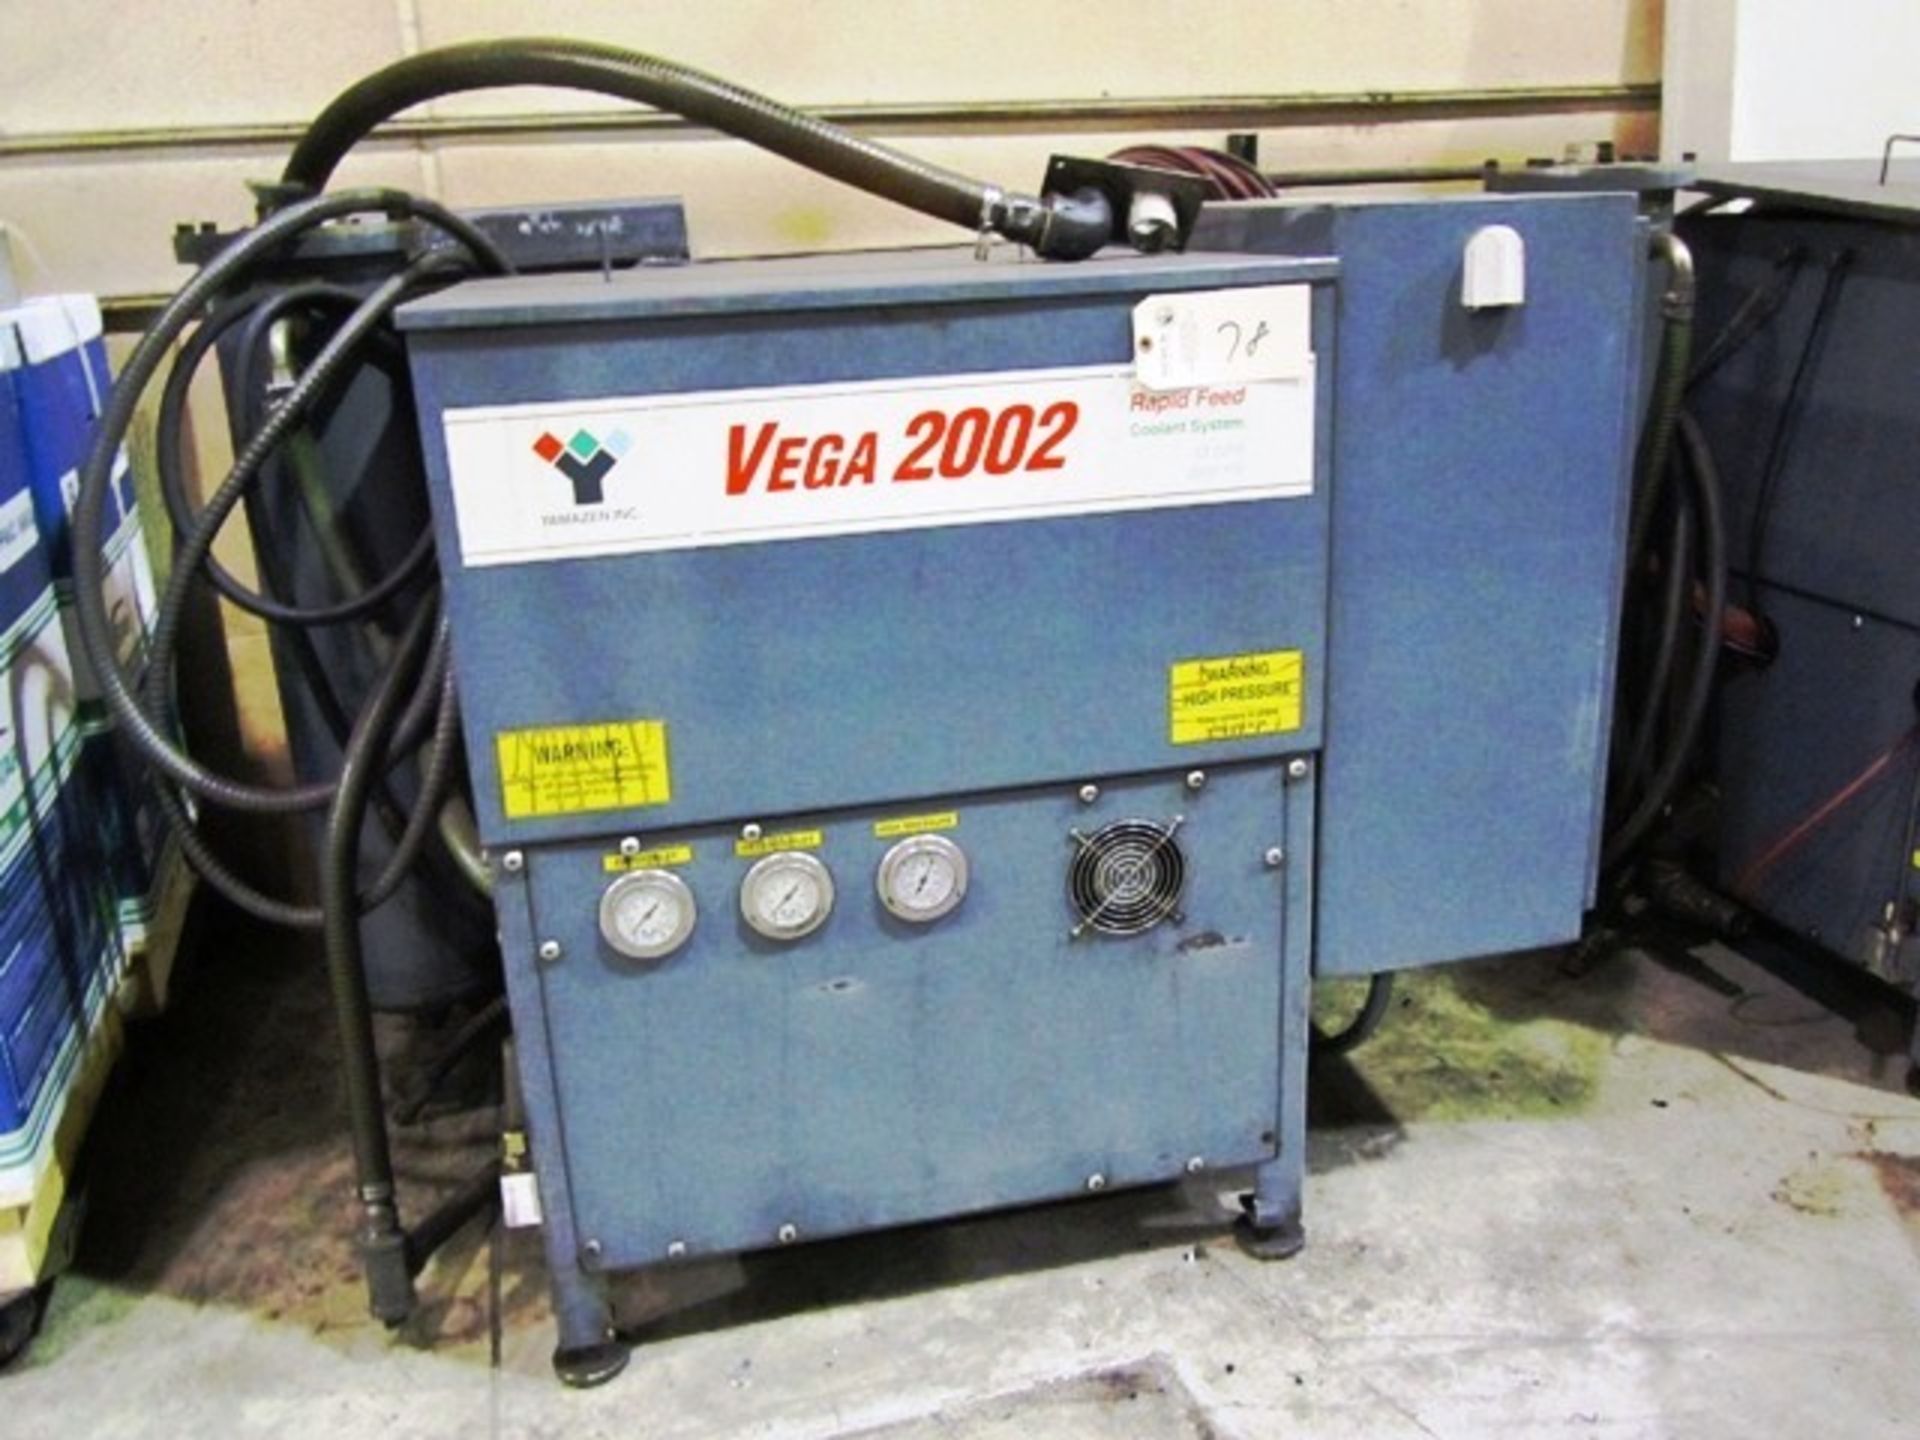 Vega 2002 Rapid Feed Coolant System with 13 GPM, 2000 PSI, Magelis Control, sn:4028